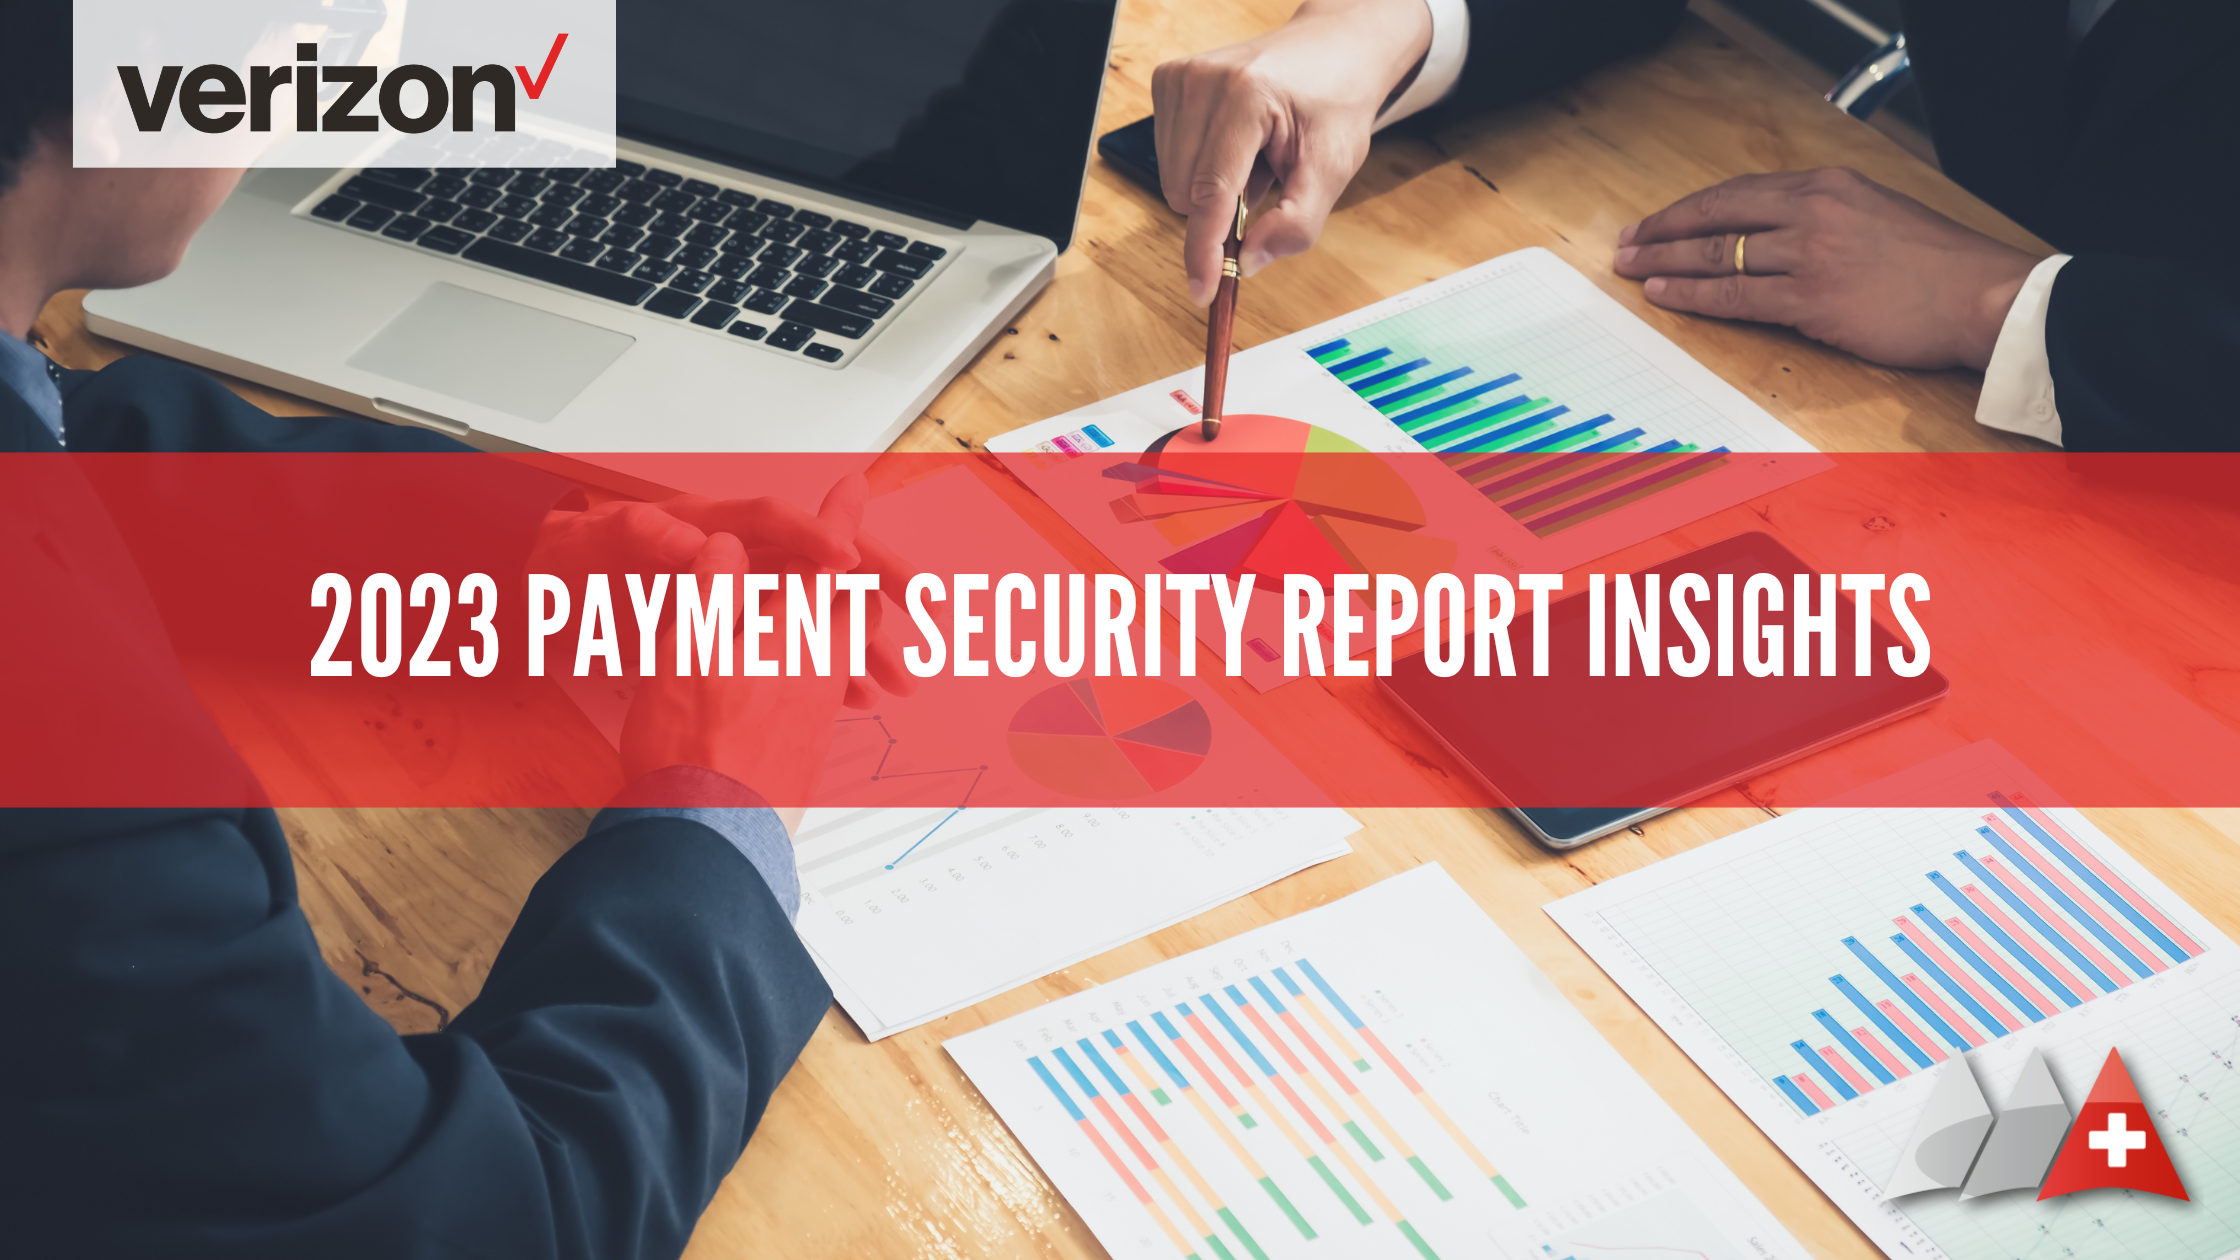 2023 PAYMENT SECURITY REPORT